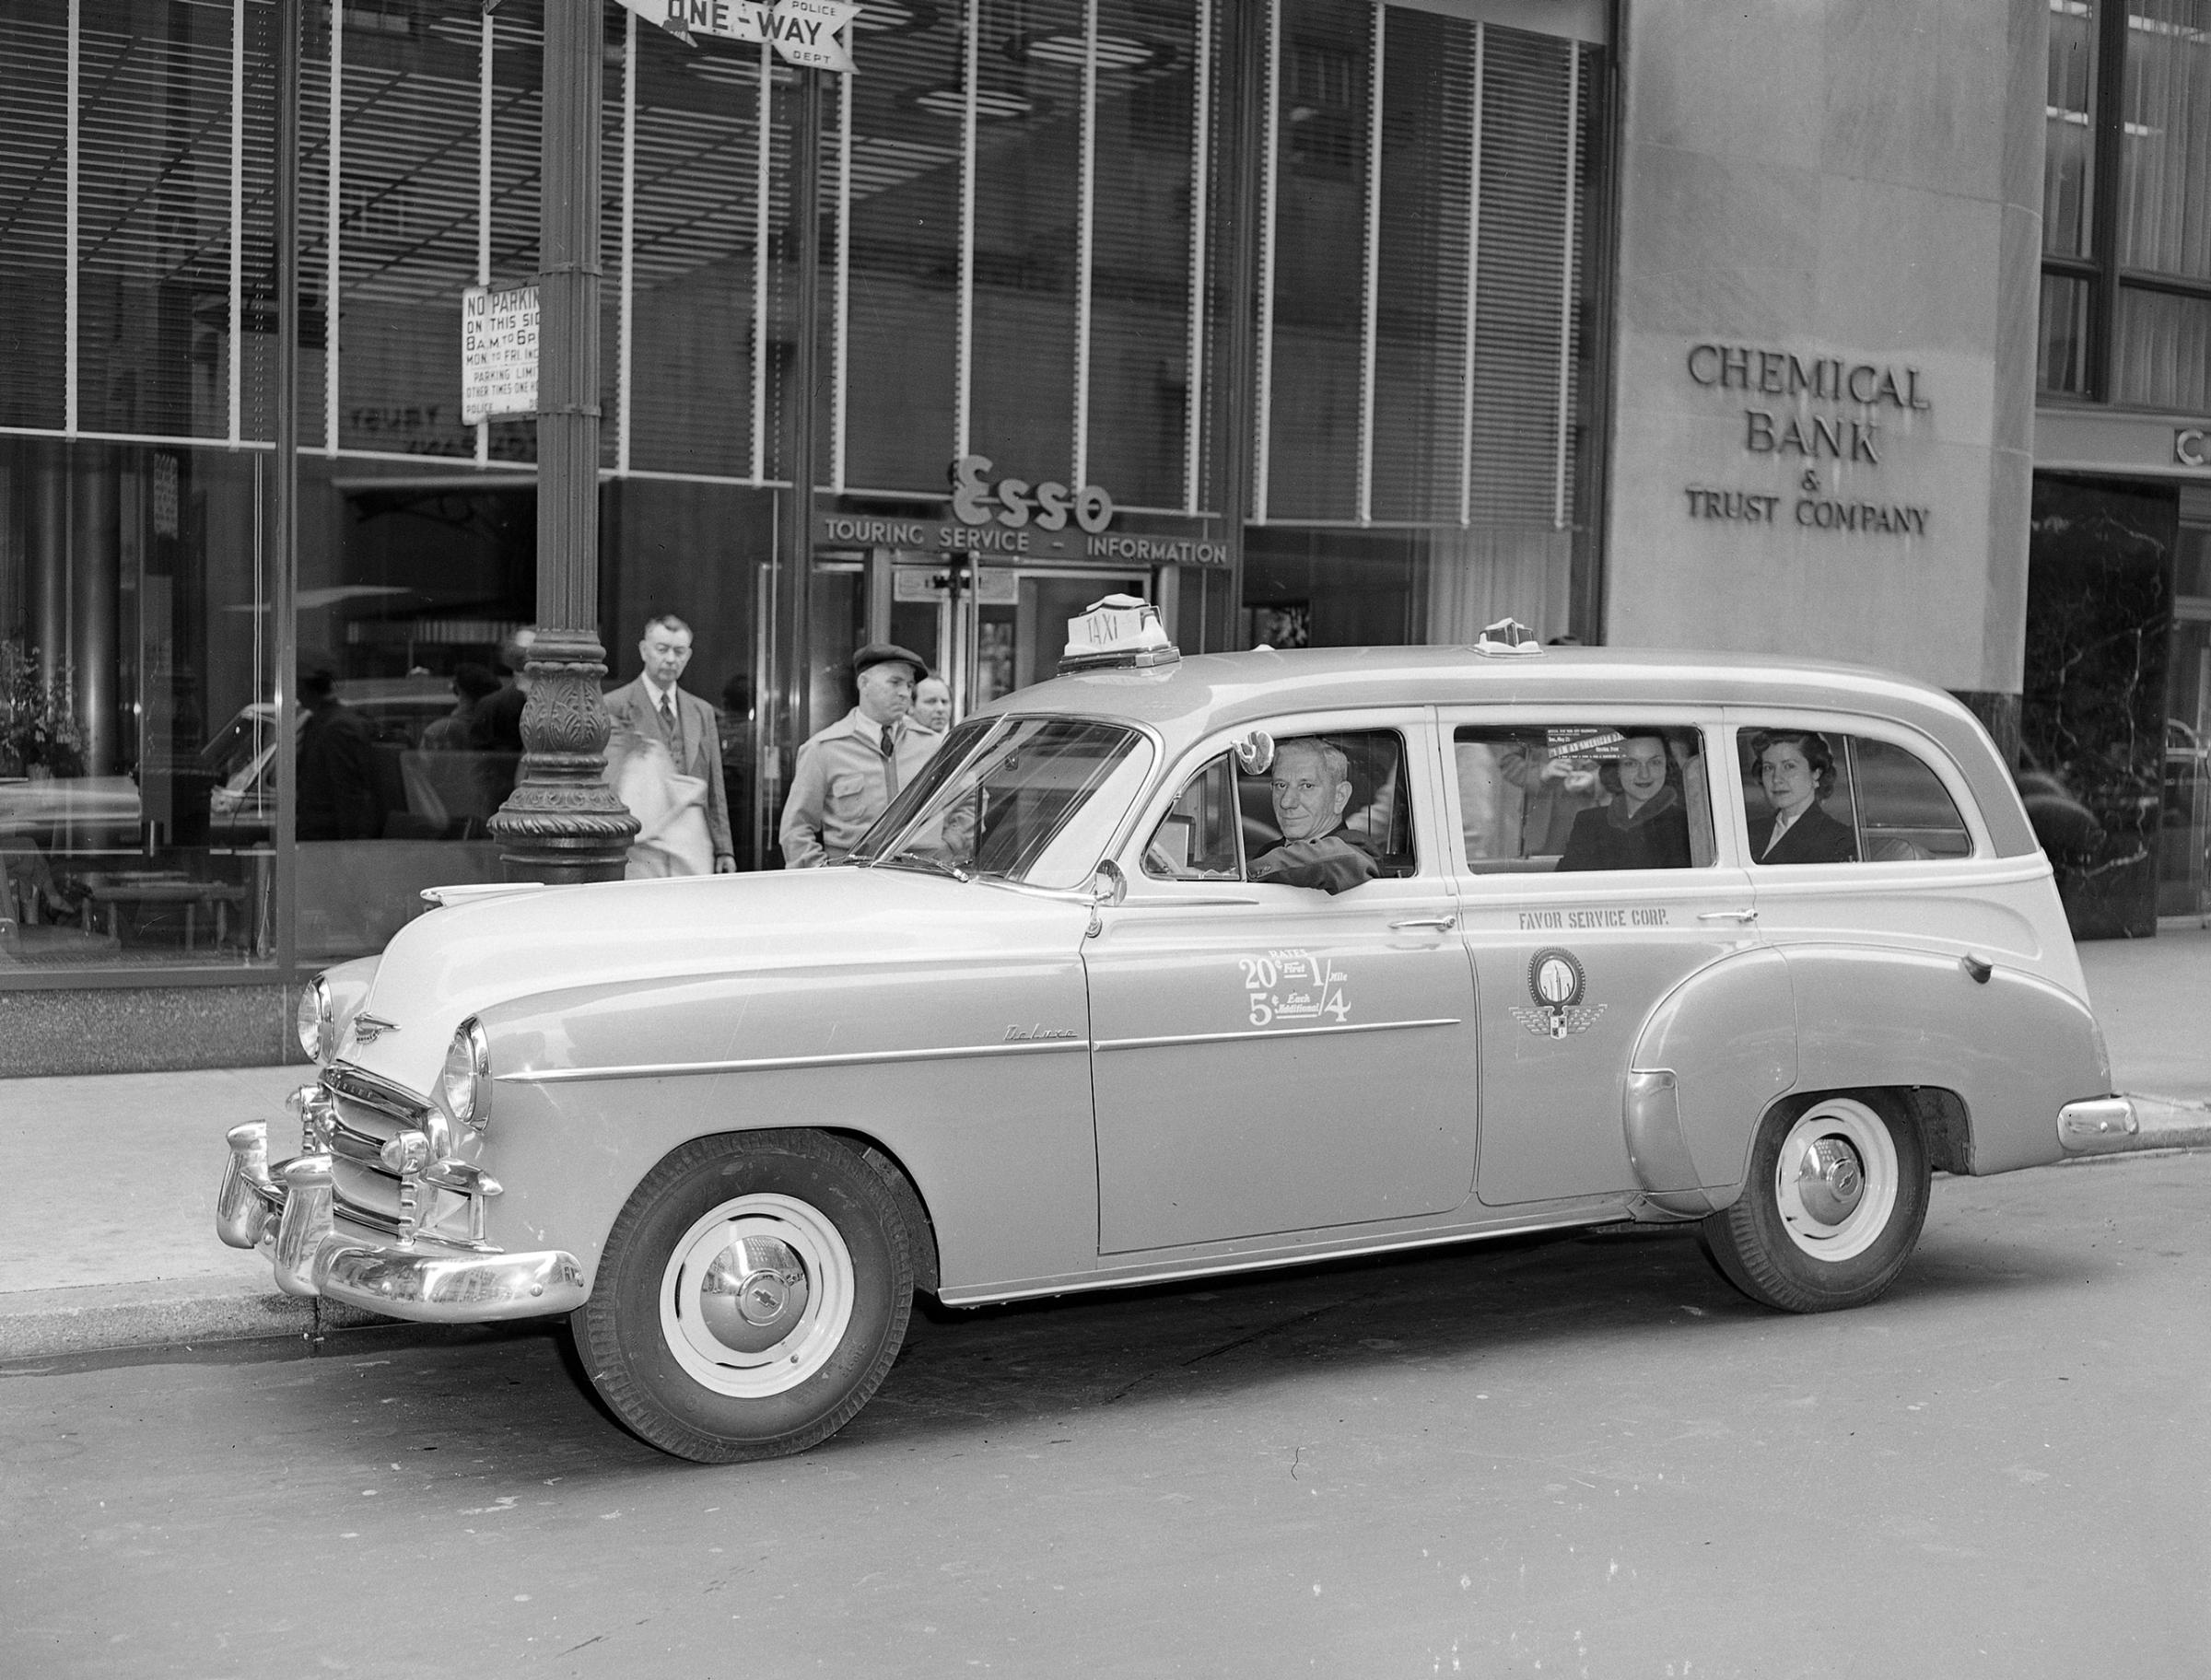 The new model taxi cab from Chevrolet is shown in New York City, May 17, 1950. The Taxicab bureau is prepared to buy up to 1,400 of the Chevrolets to replace the larger and more expensive cabs now on the streets. (AP Photo/Carl Nesensohn)